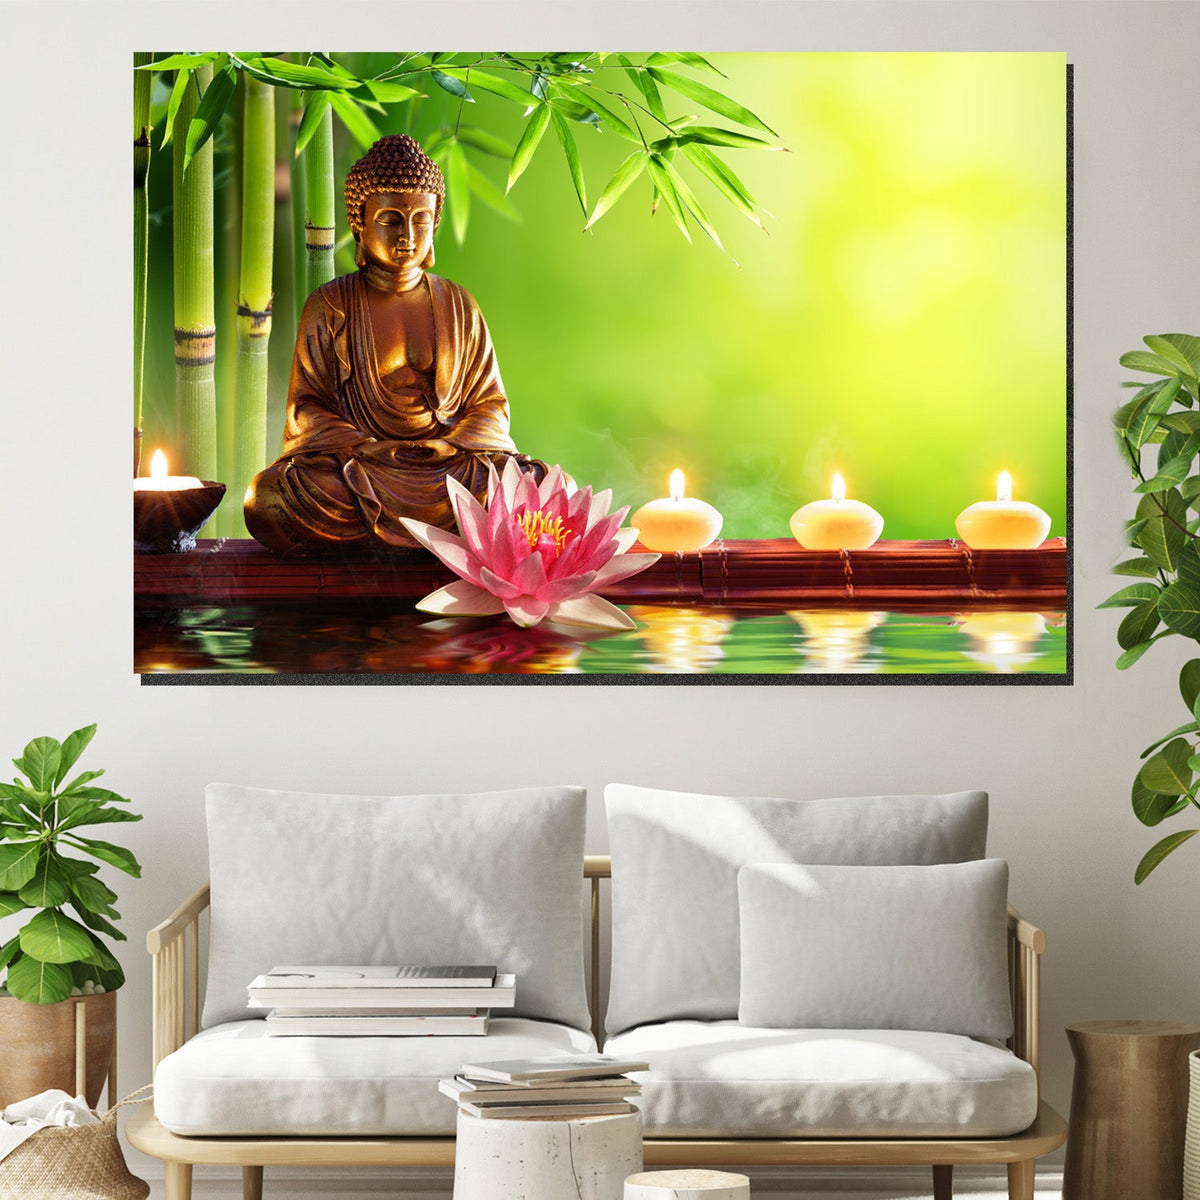 https://cdn.shopify.com/s/files/1/0387/9986/8044/products/BuddhawithcandlesCanvasArtprintStretched-2.jpg